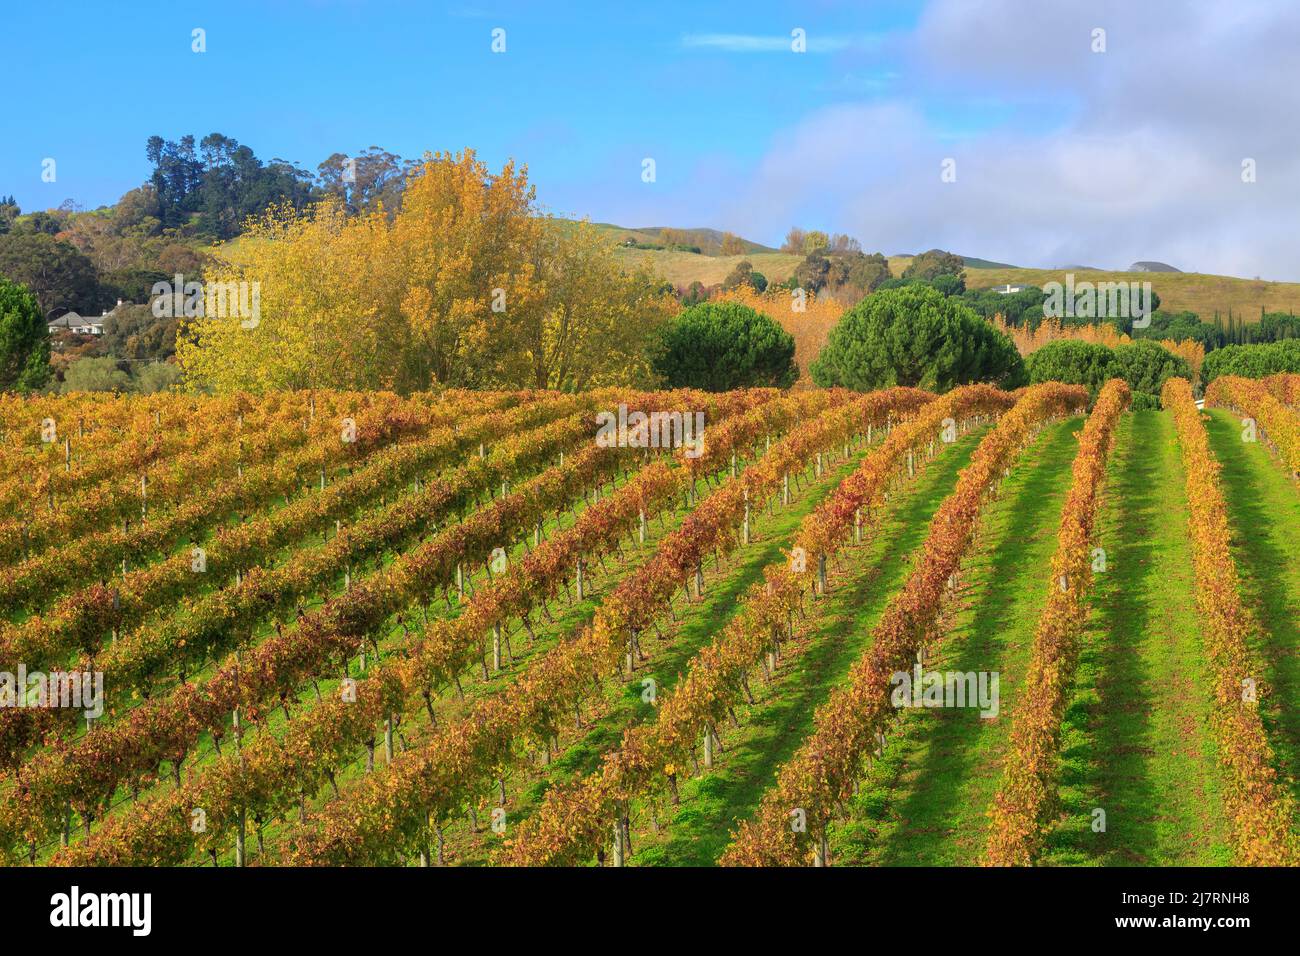 A vineyard in autumn. The rows of grapevines have beautiful golden foliage. Hawke's Bay, New Zealand Stock Photo